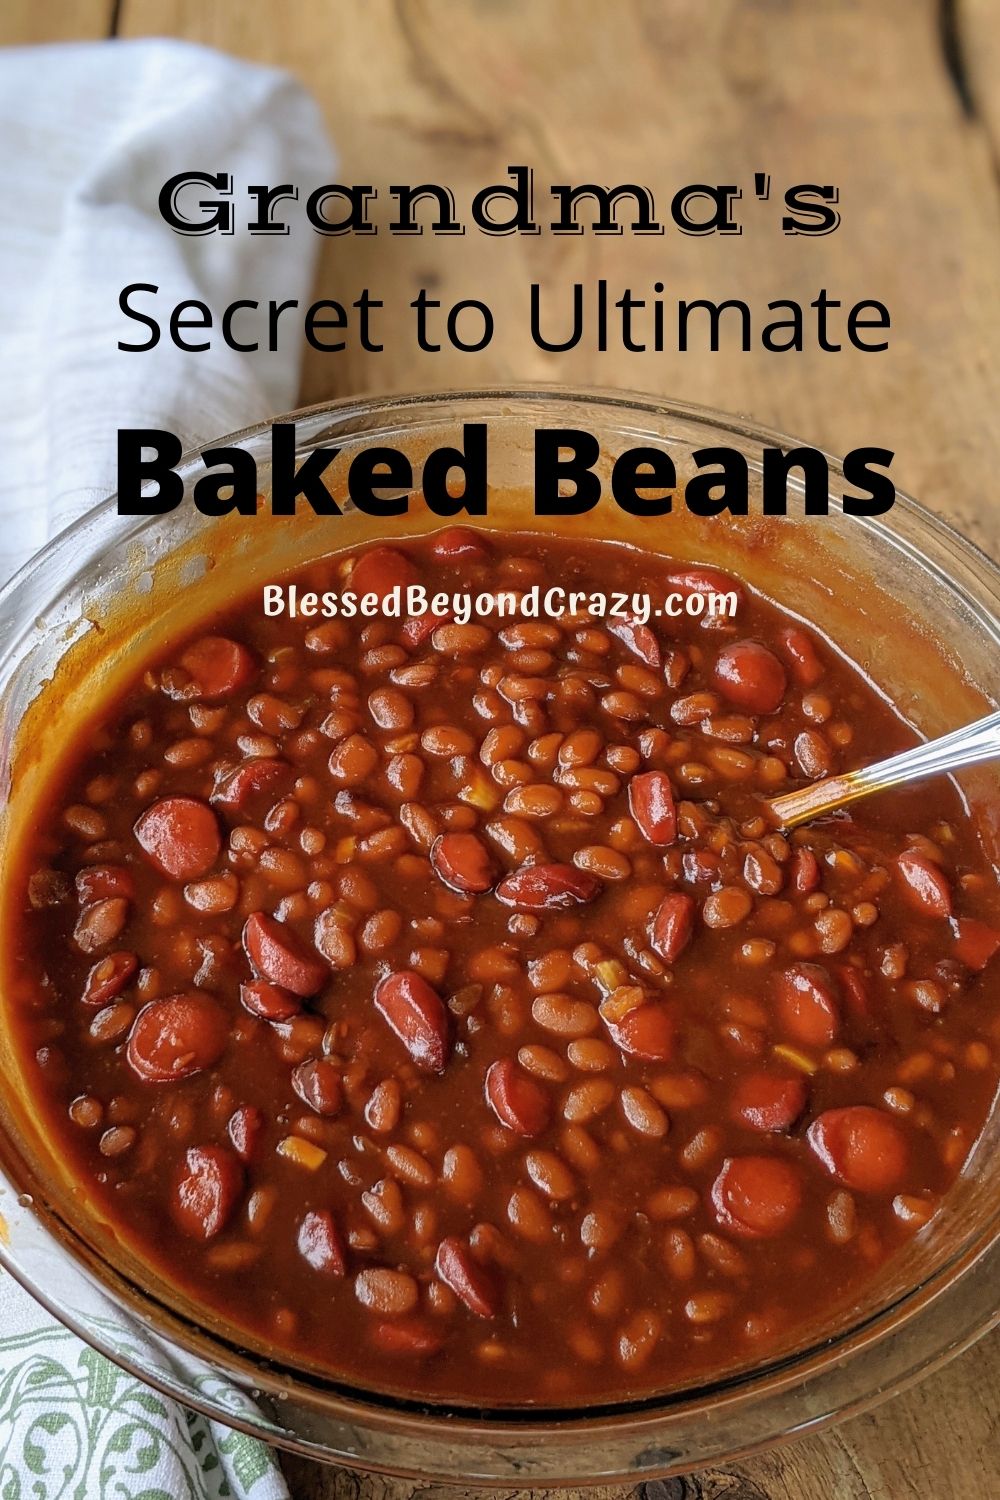 Grandma's Secret to Ultimate Baked Beans - Blessed Beyond Crazy